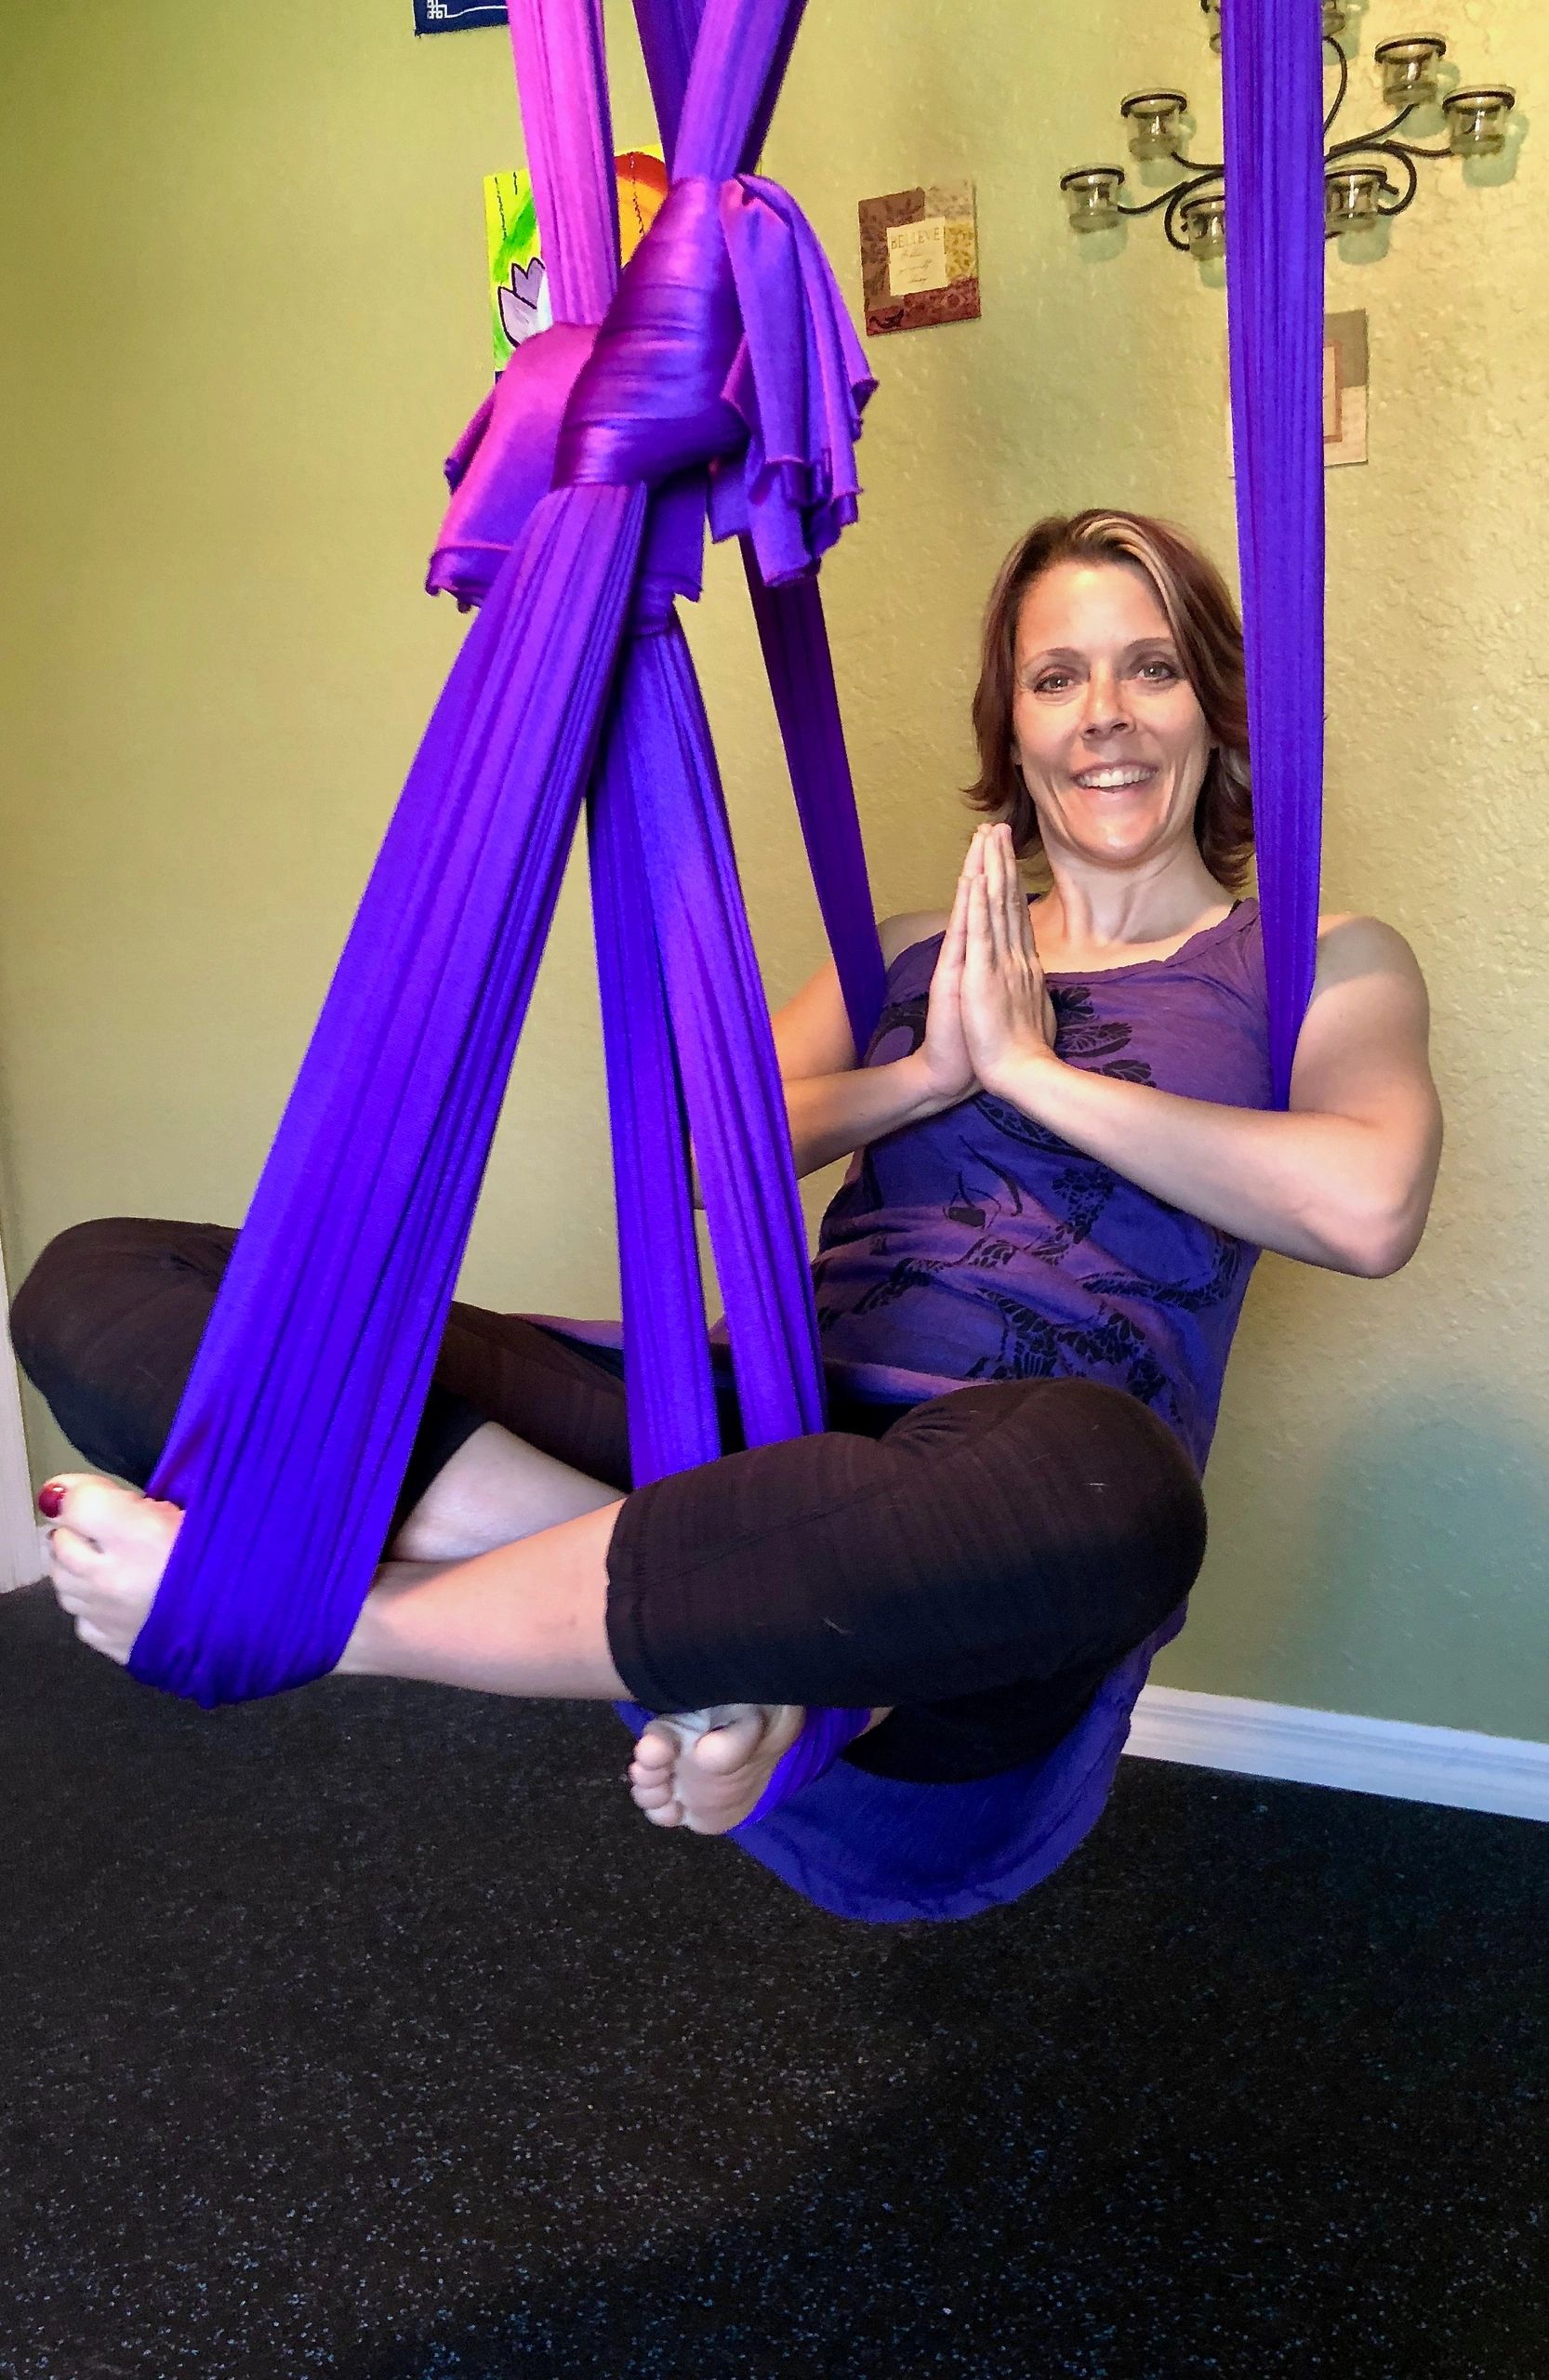 Aerial Yoga, Private Sessions, Yoga, Stretching 